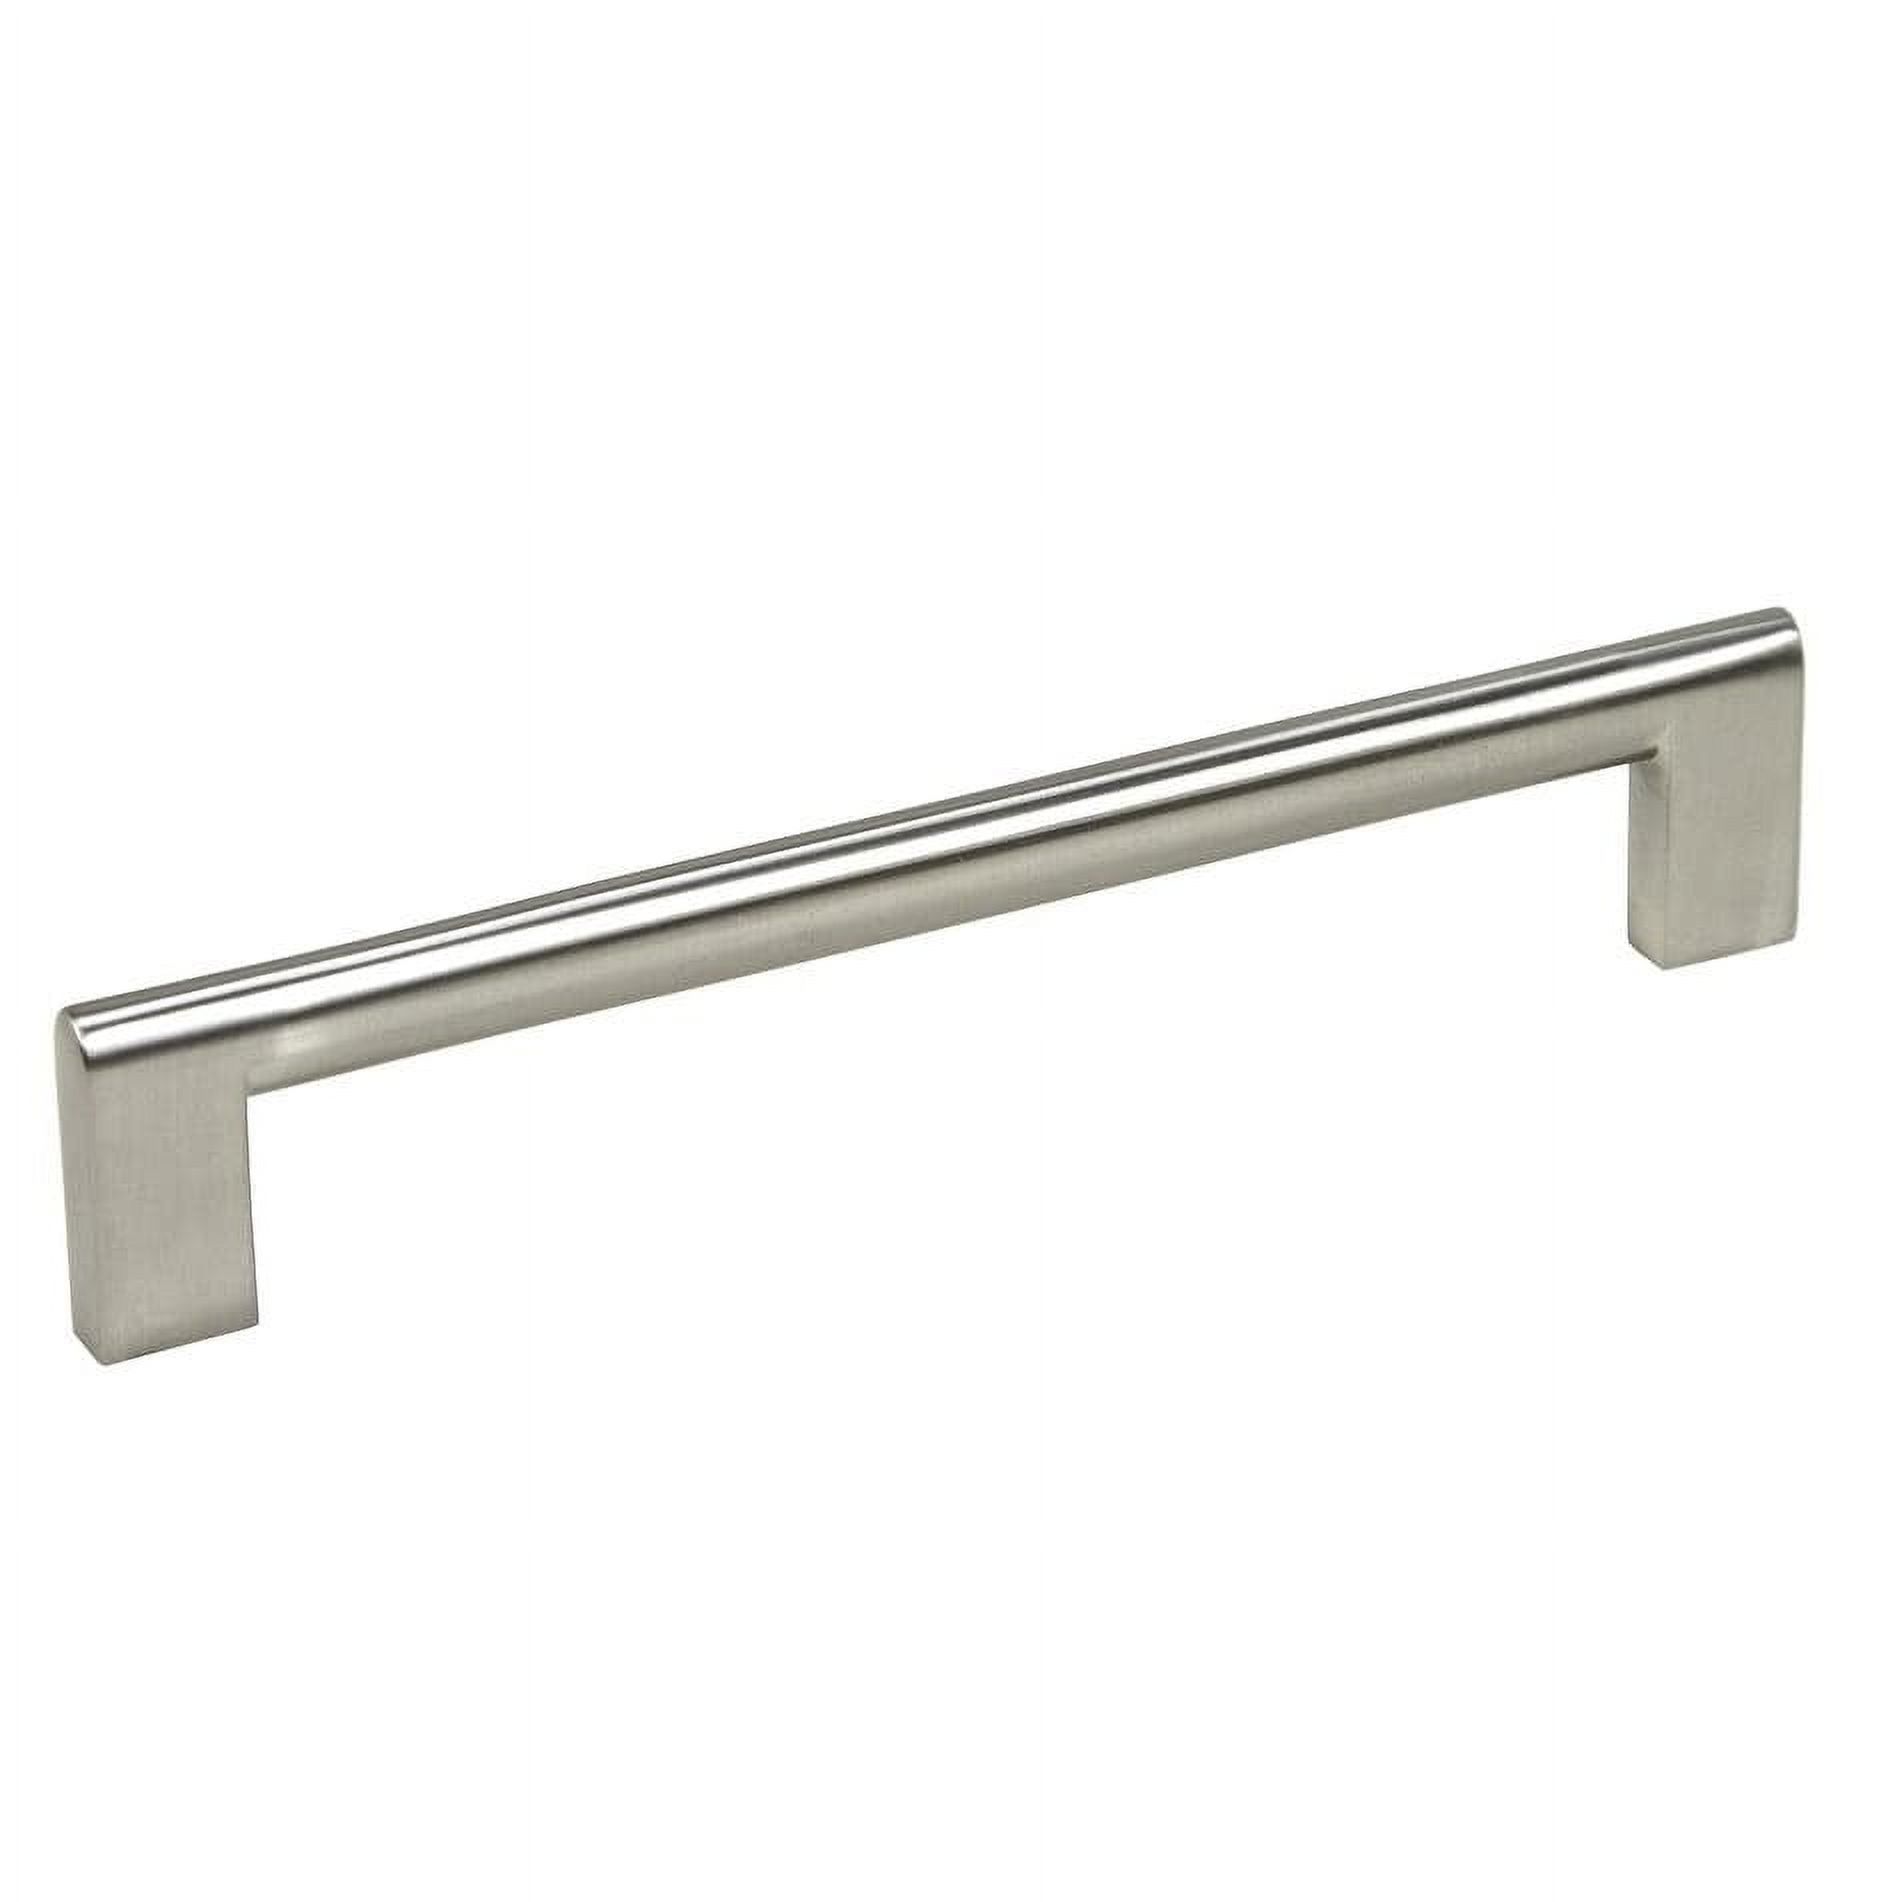 6-15/16 inch Key Shape Stainless Steel Handle Contemporary 6-15/16" Key Shape Design Stainless Steel Finish Cabinet Bar Pull Handle (Case of 4) - image 2 of 5